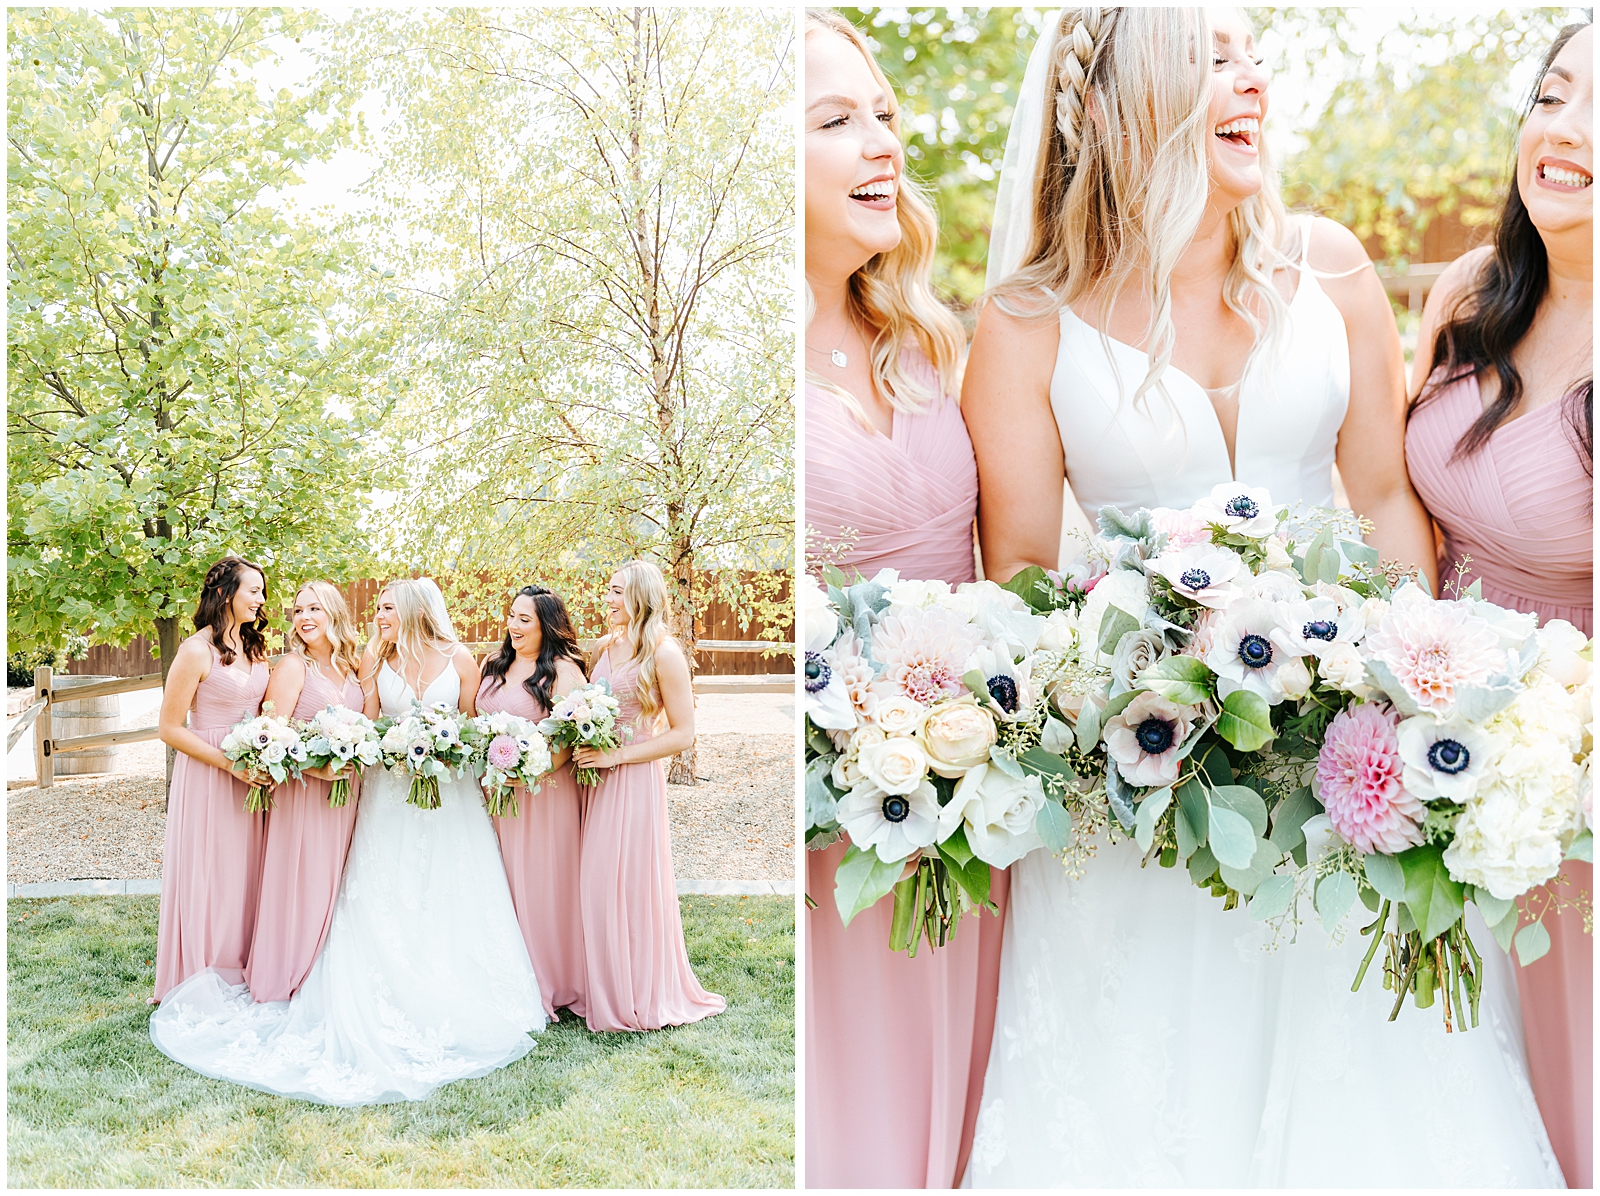 Bridesmaids in Dusty Rose Dresses August Still Water Hollow Wedding 